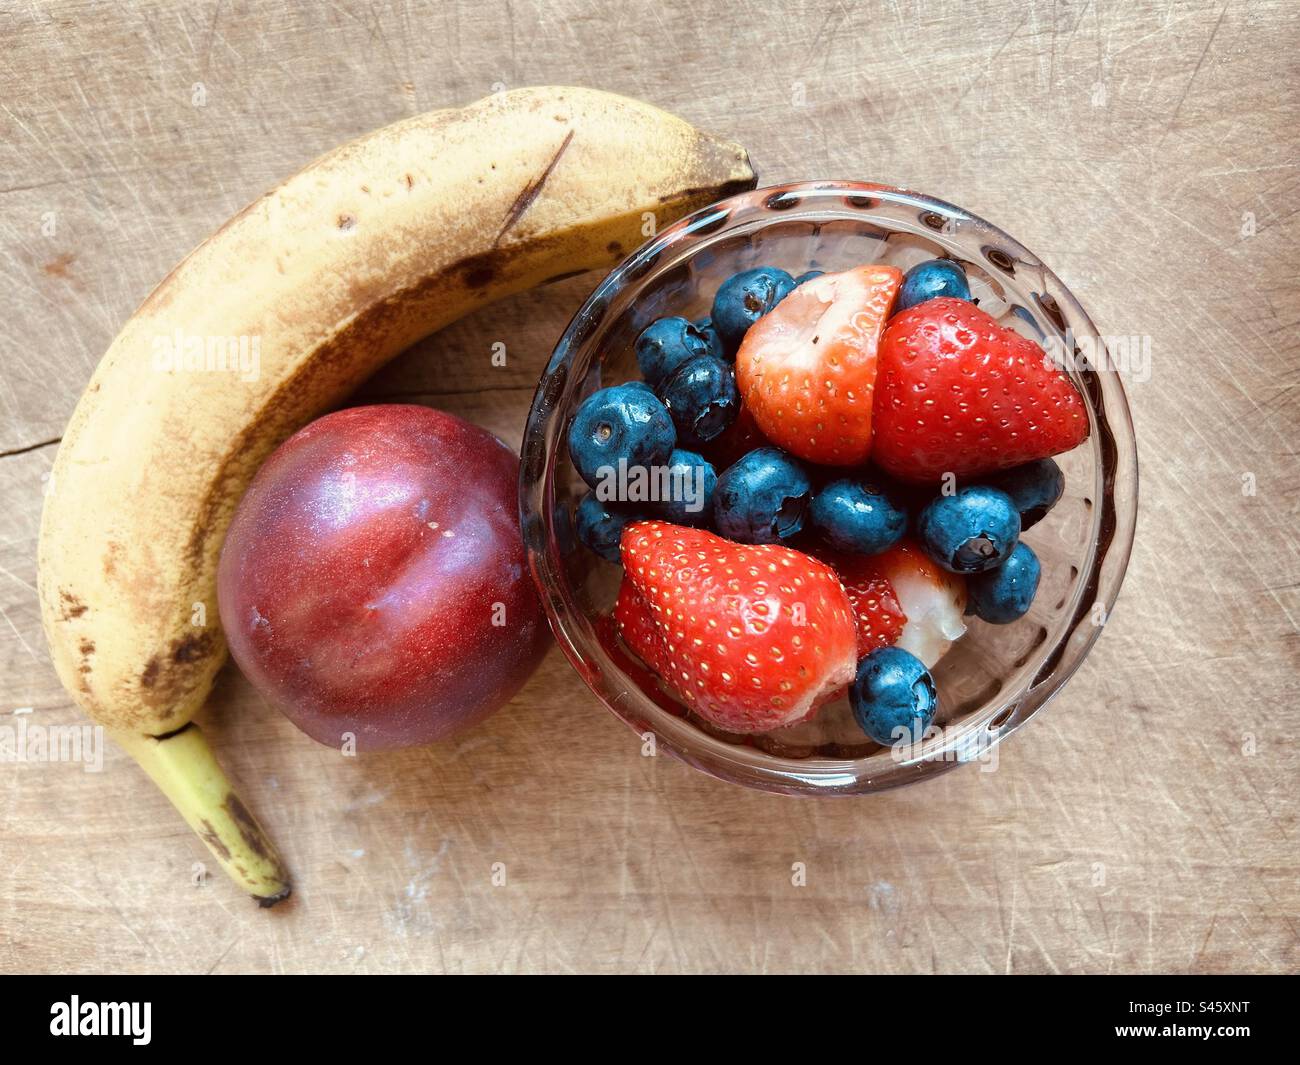 Colourful,banana,nectarine, strawberries and blueberries on a chopping board. Stock Photo